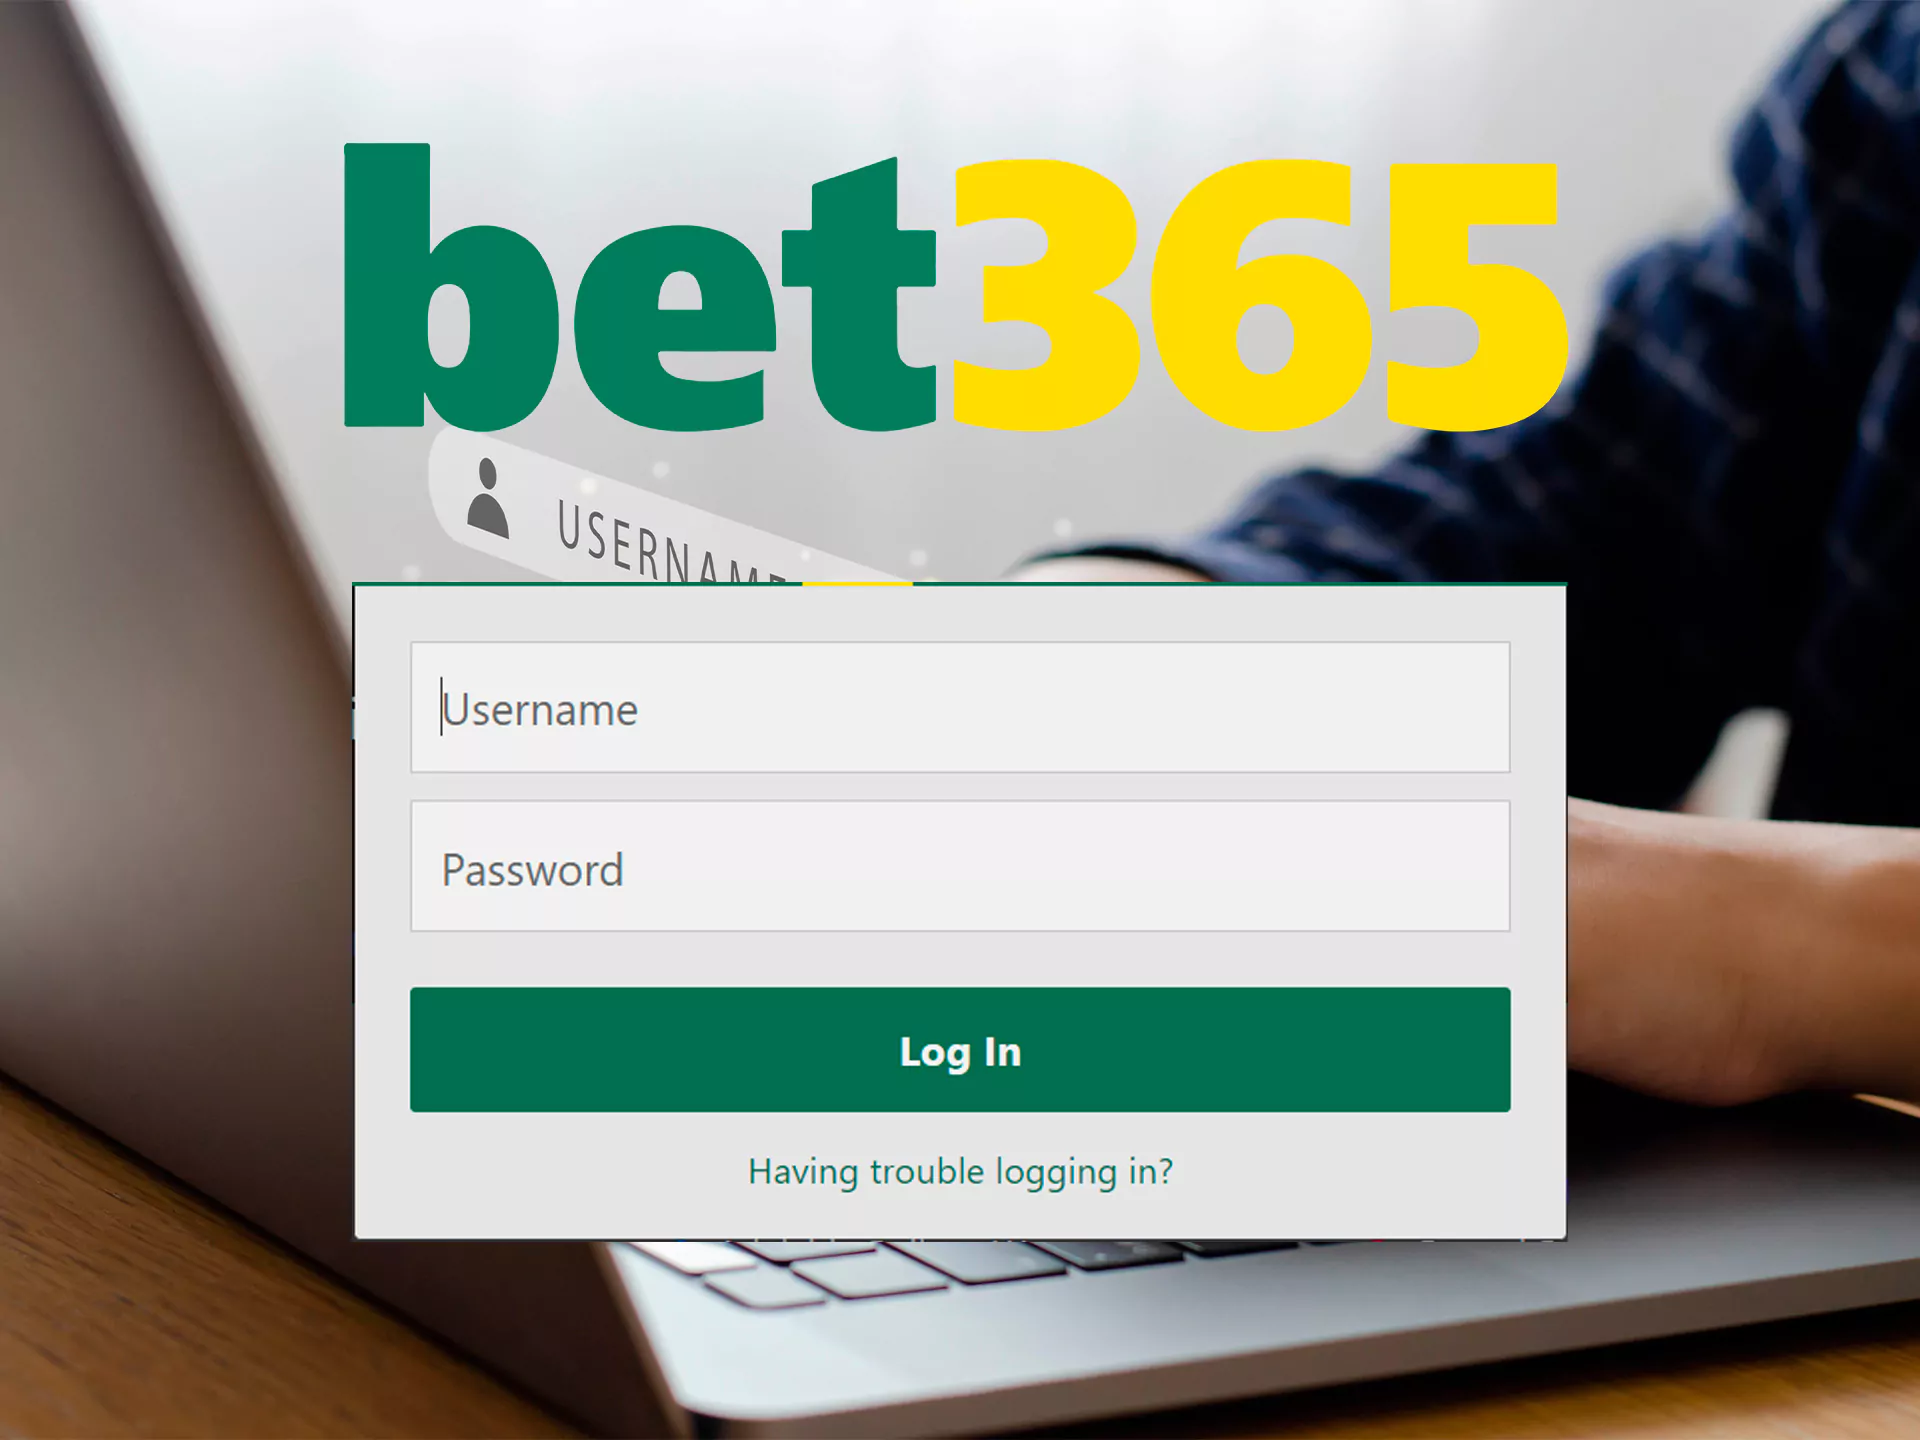 Use your username and password to log in to Bet365.